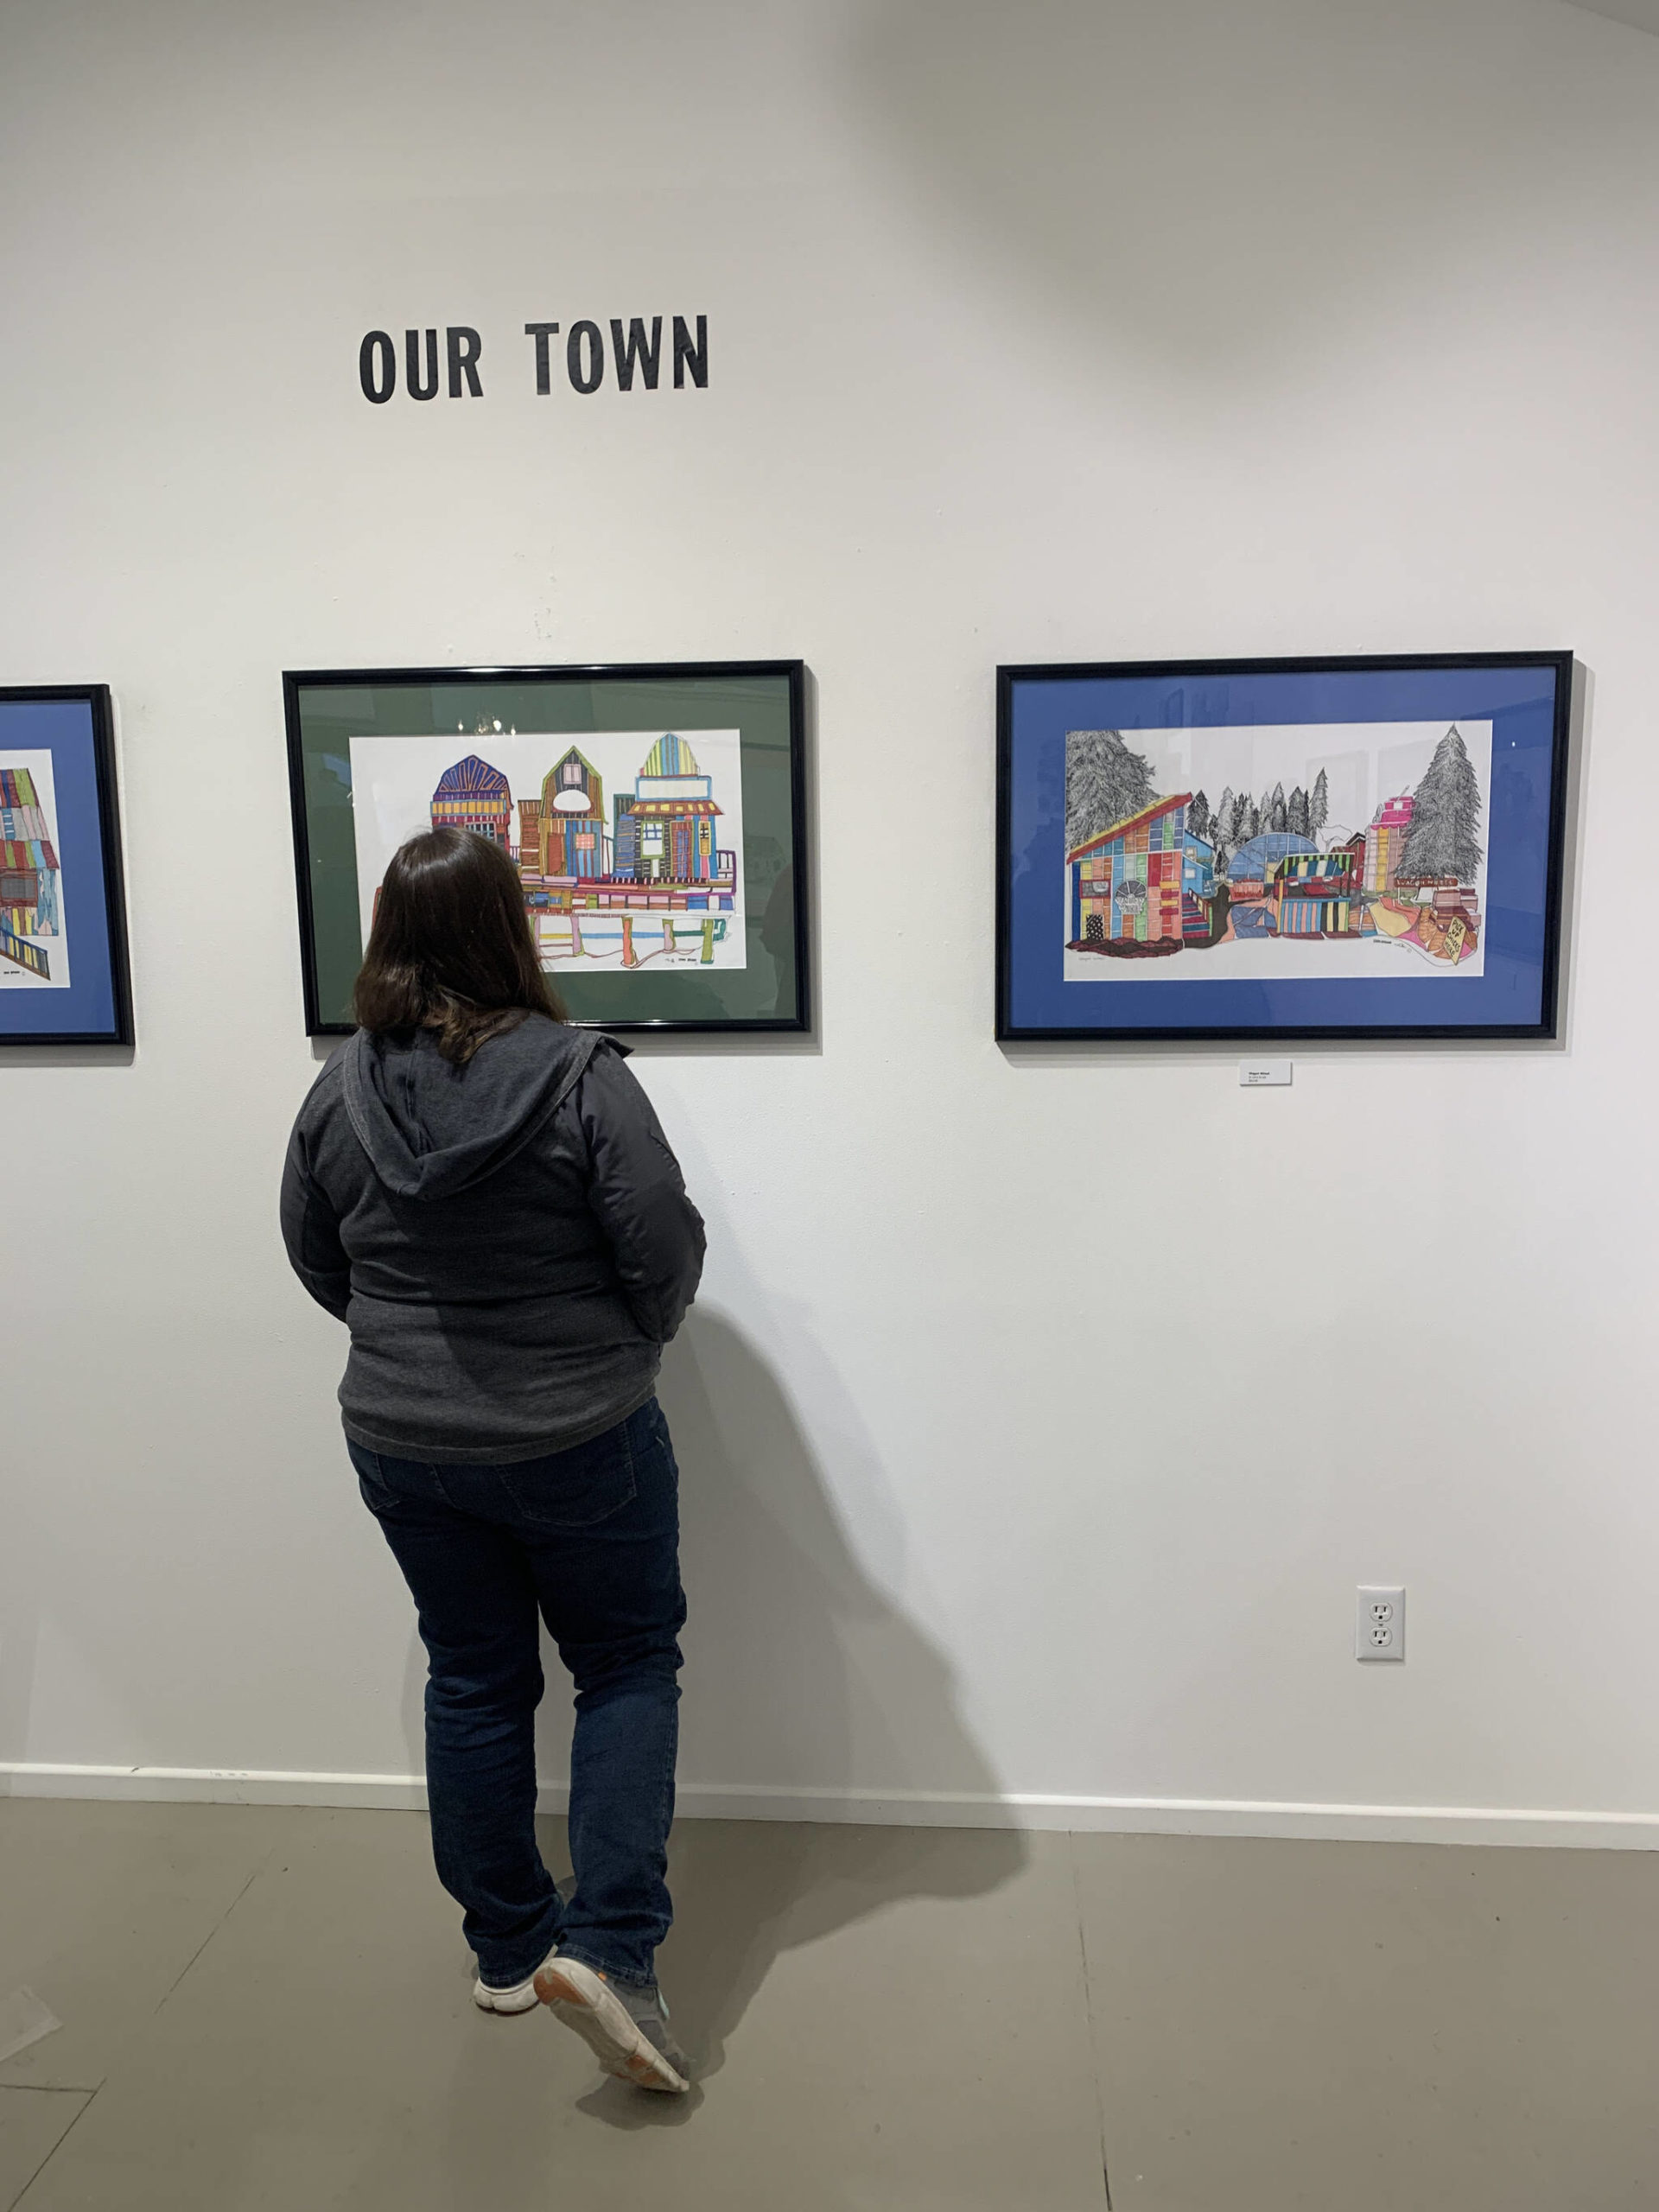 A community member views work in the Our Town exhibit at Fireweed Gallery during First Friday, Oct. 7, 2022, in Homer, Alaska. (Photo by Christina Whiting/Homer News)